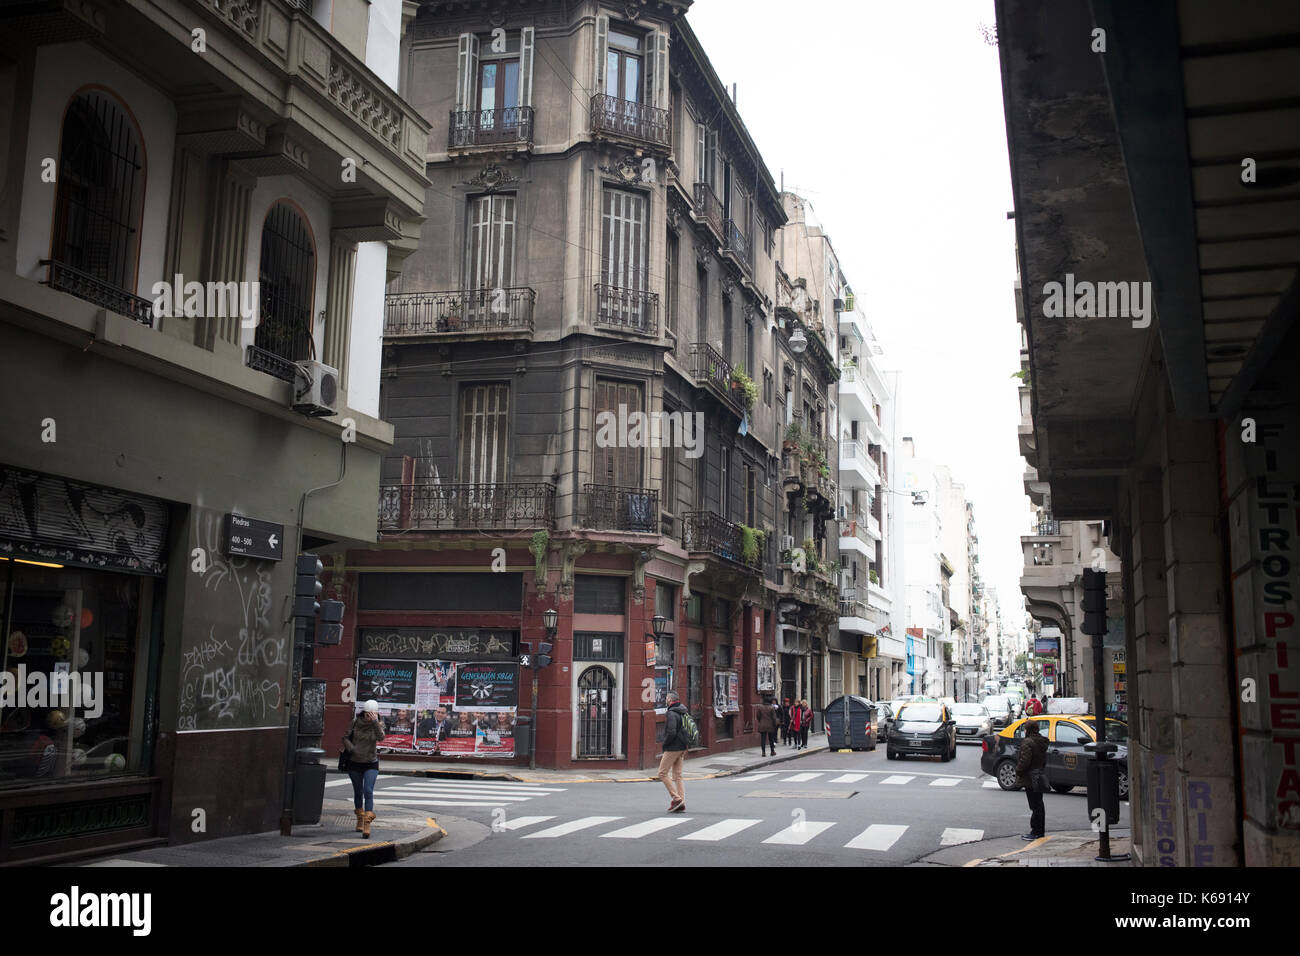 BUENOS AIRES, ARGENTINA - SEPTEMBER 2017 - View of the streets of San Telmo, an old neighboorhood in Buenos Aires Stock Photo